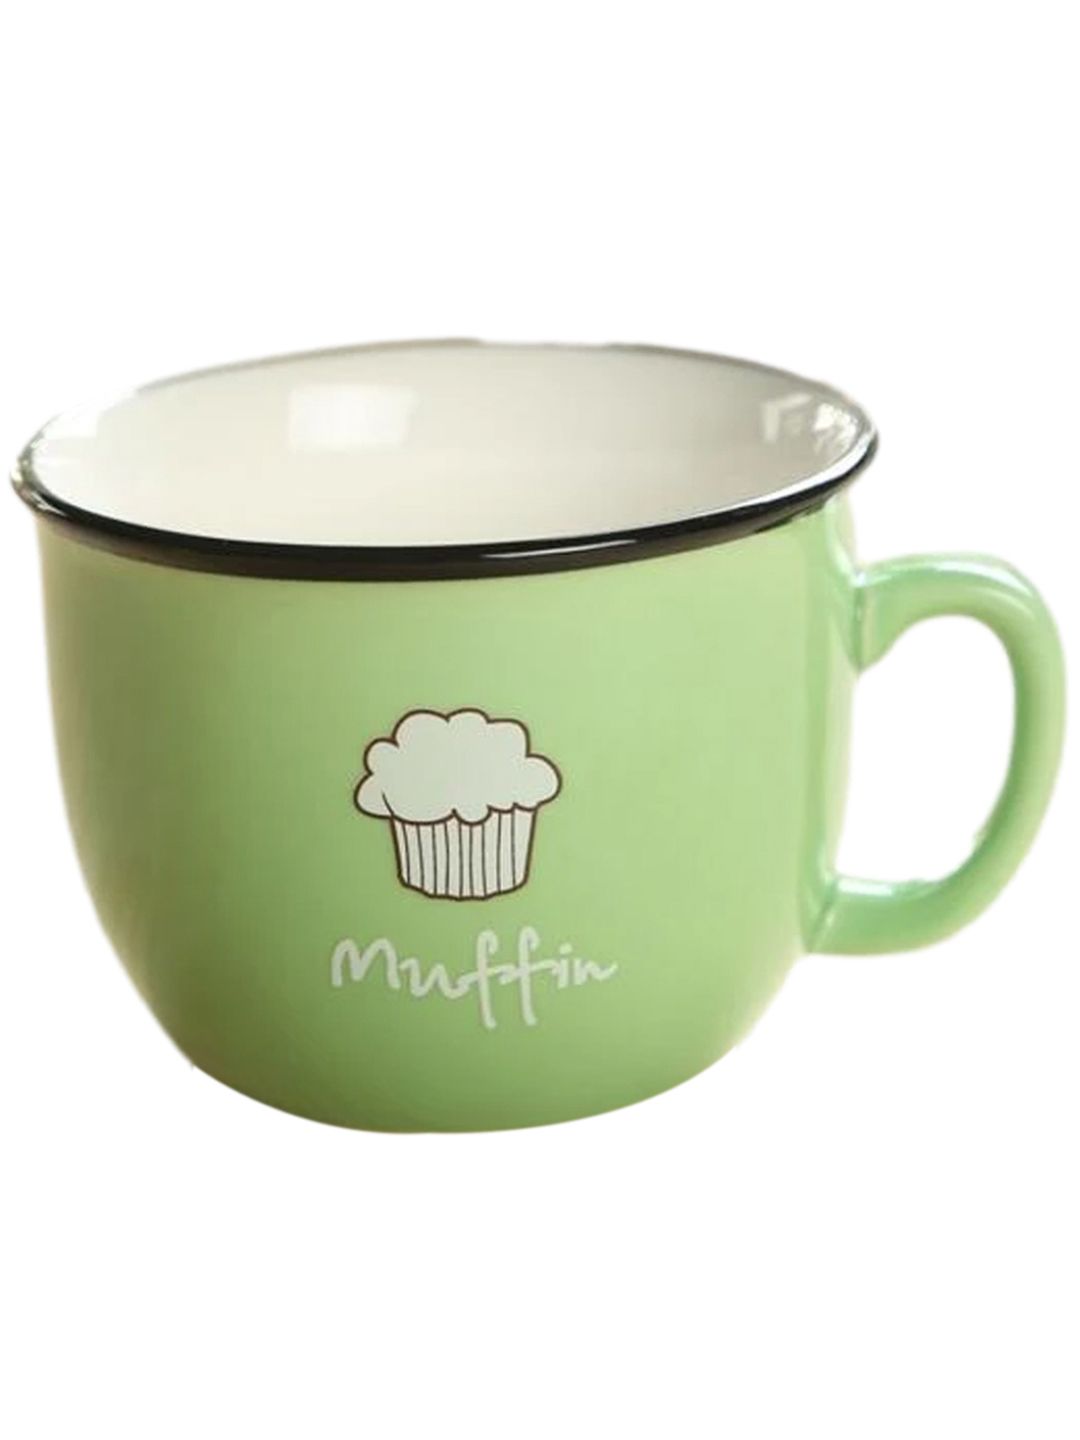 BonZeaL Green & White Printed Ceramic Glossy Cup Price in India